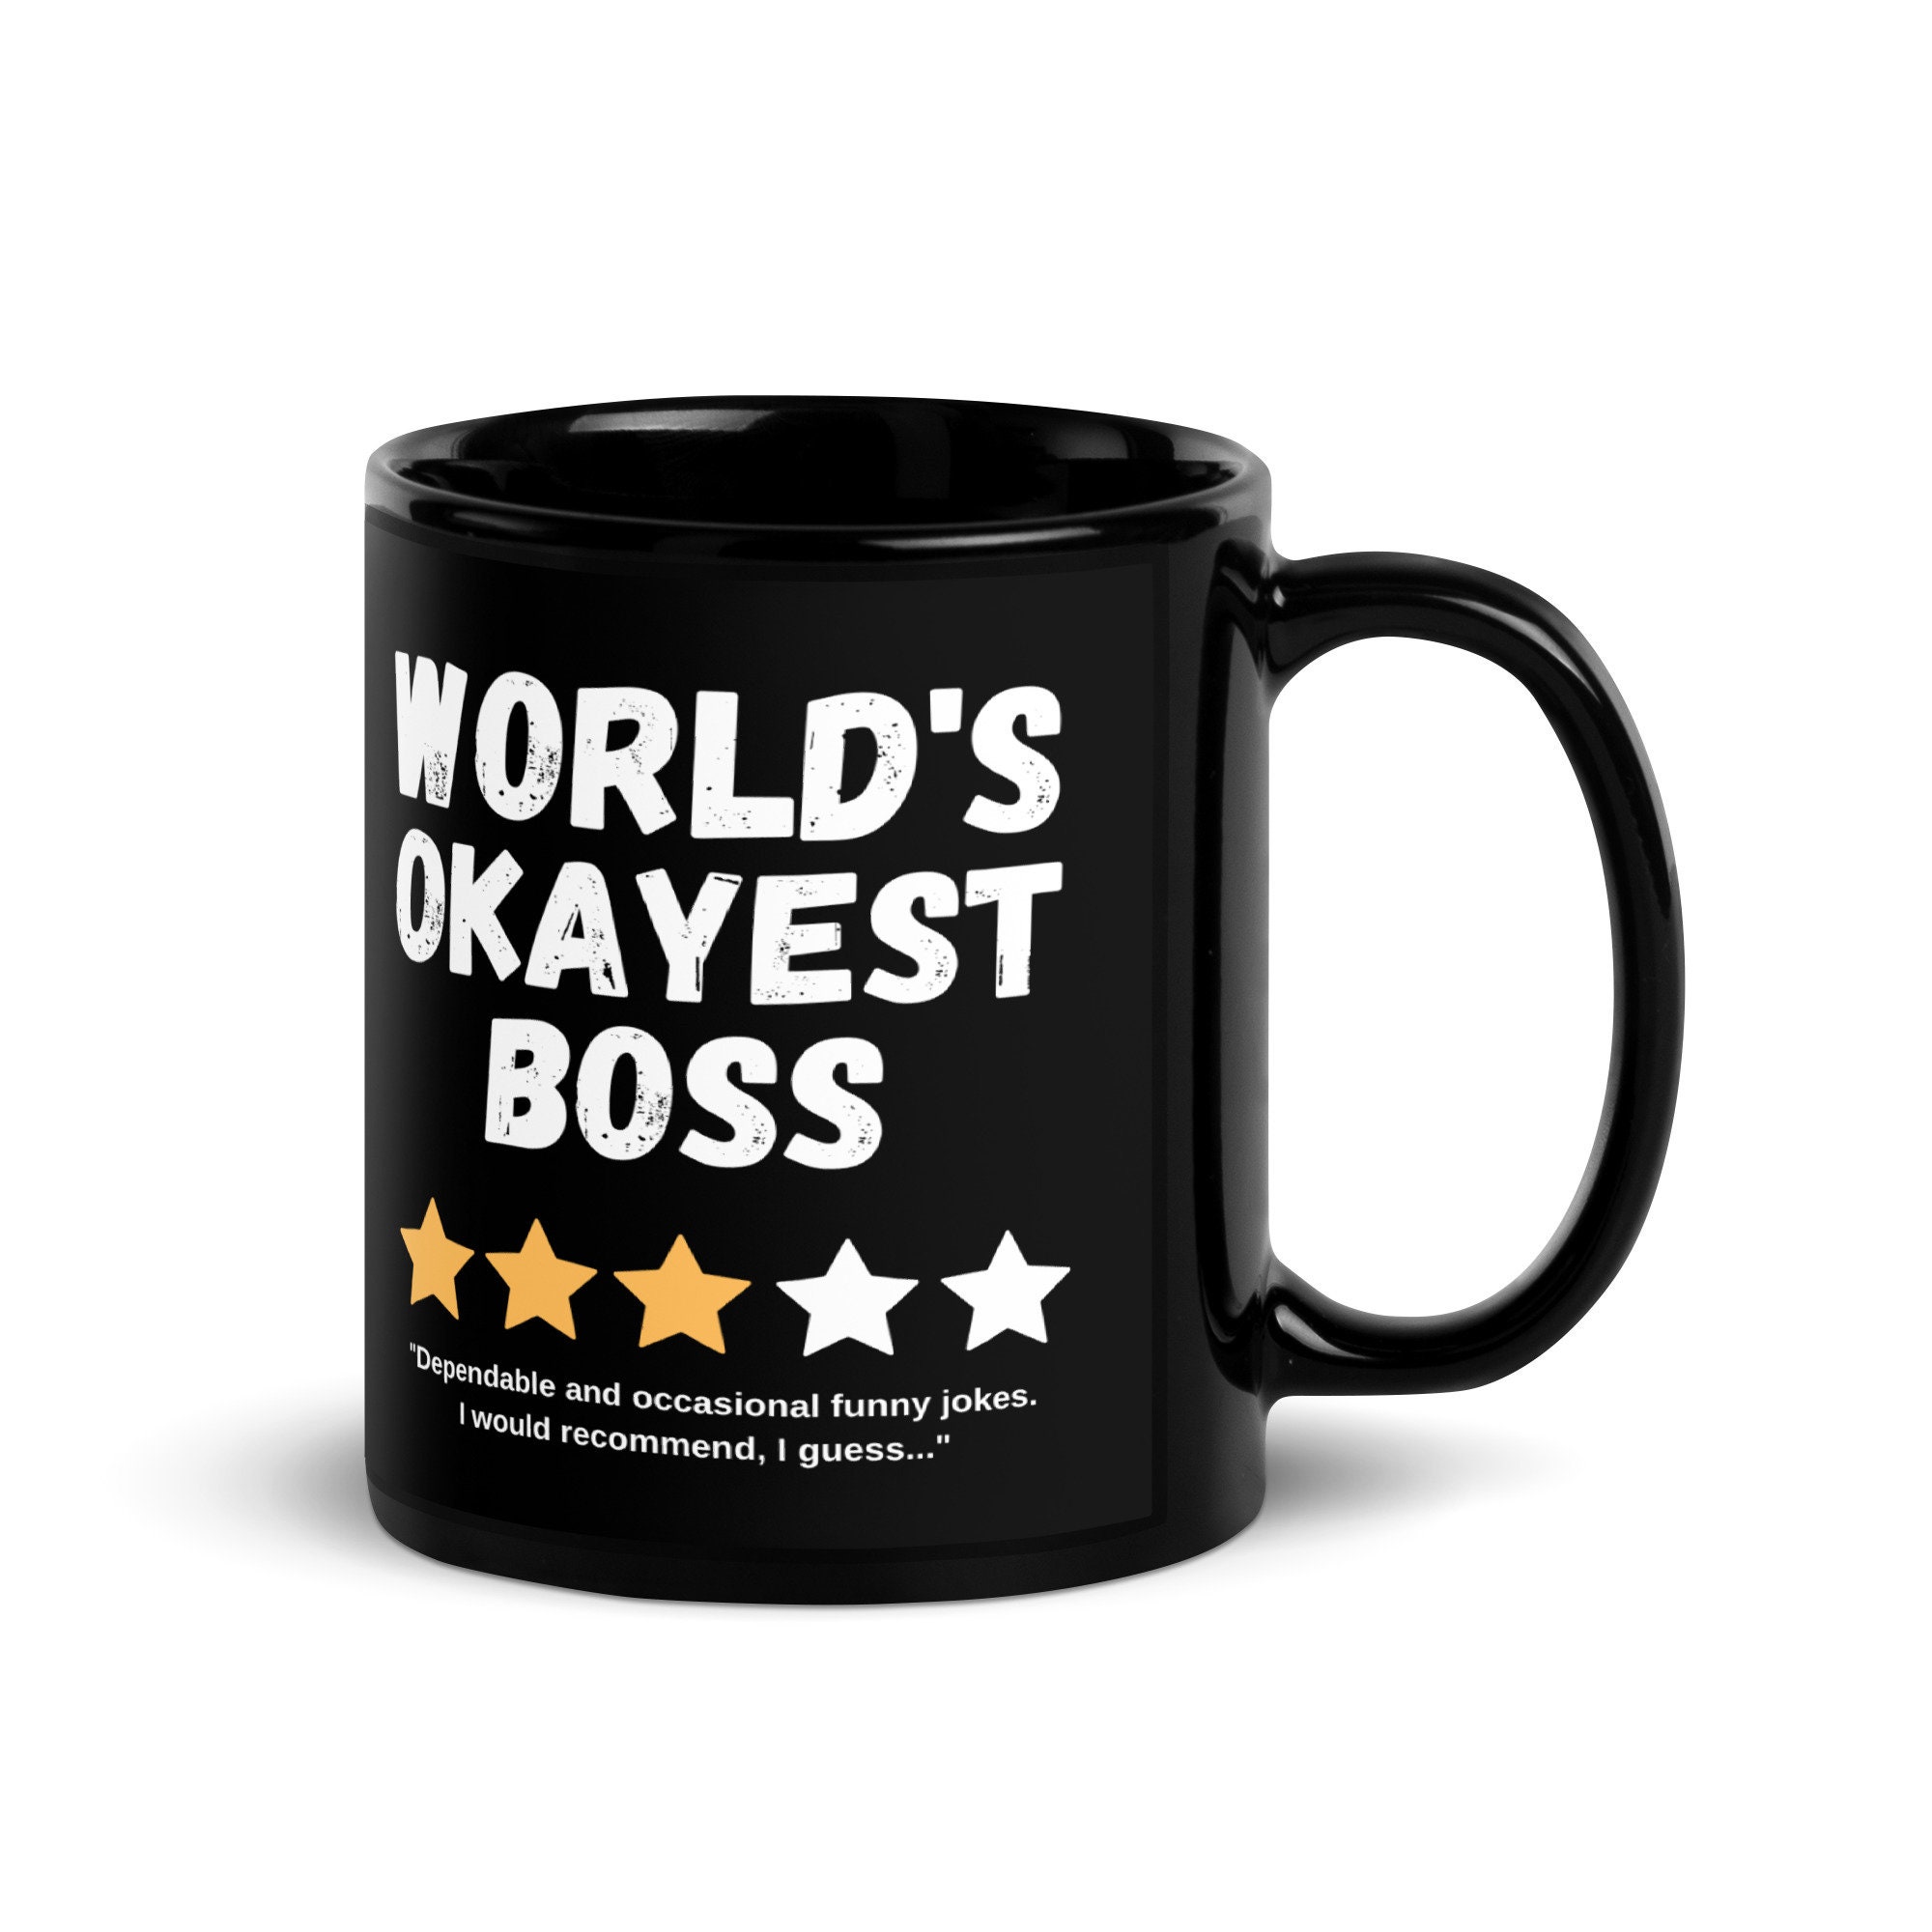 Funny Coffee Mugs Gifts for Women - Sarcastic Novelty Cups Gag Gift for  Friends, Coworkers, Boss, Em…See more Funny Coffee Mugs Gifts for Women 